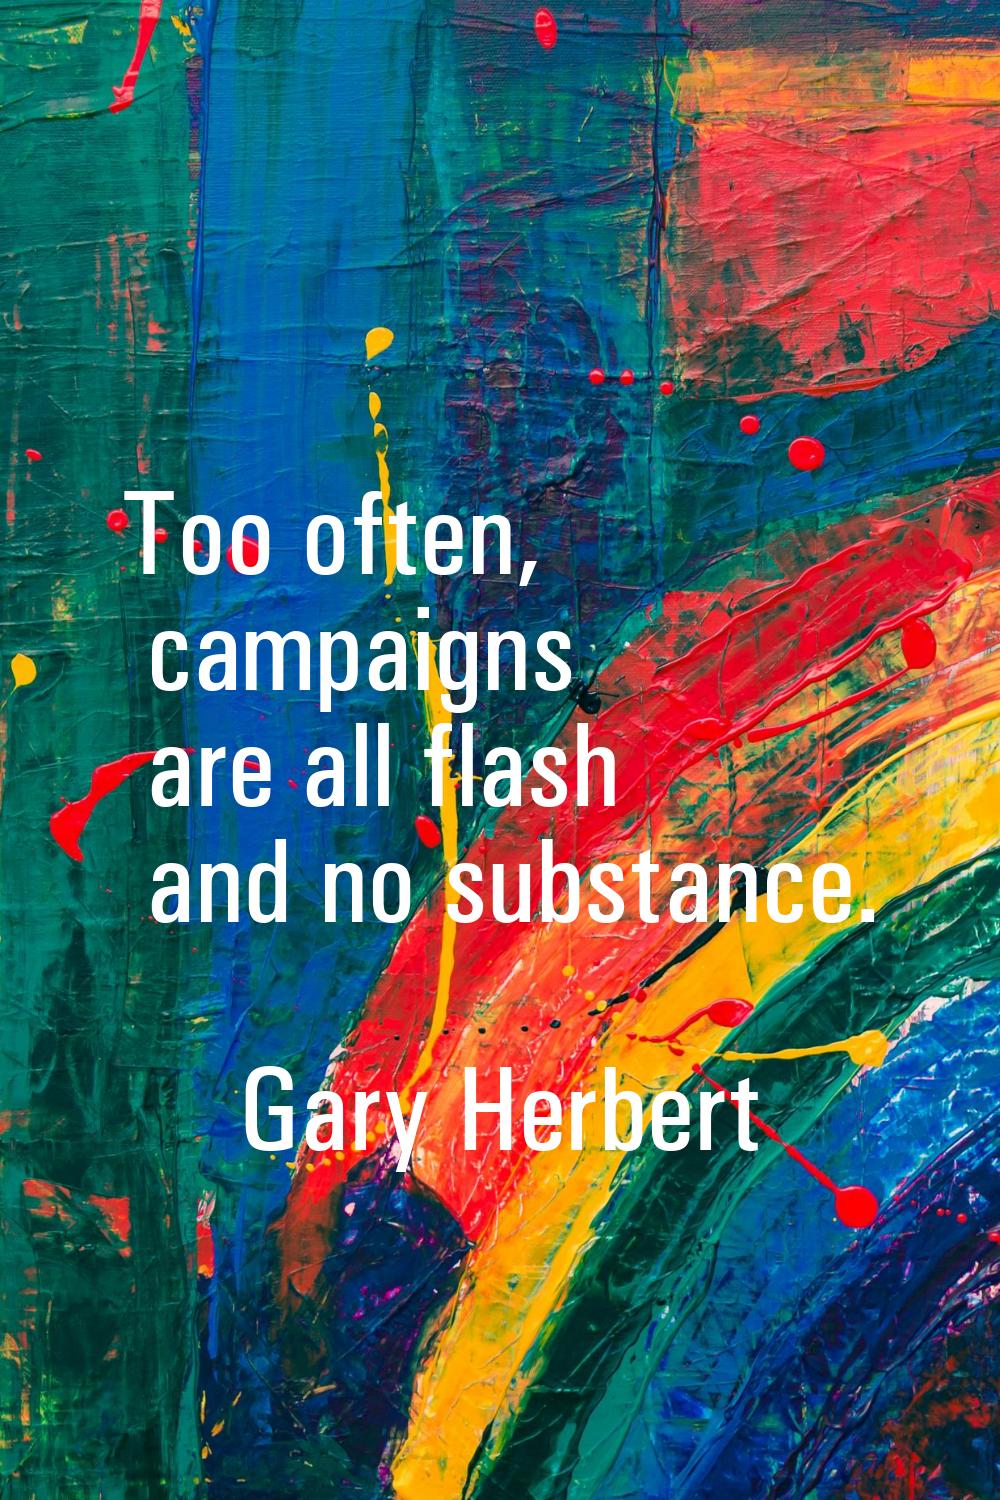 Too often, campaigns are all flash and no substance.